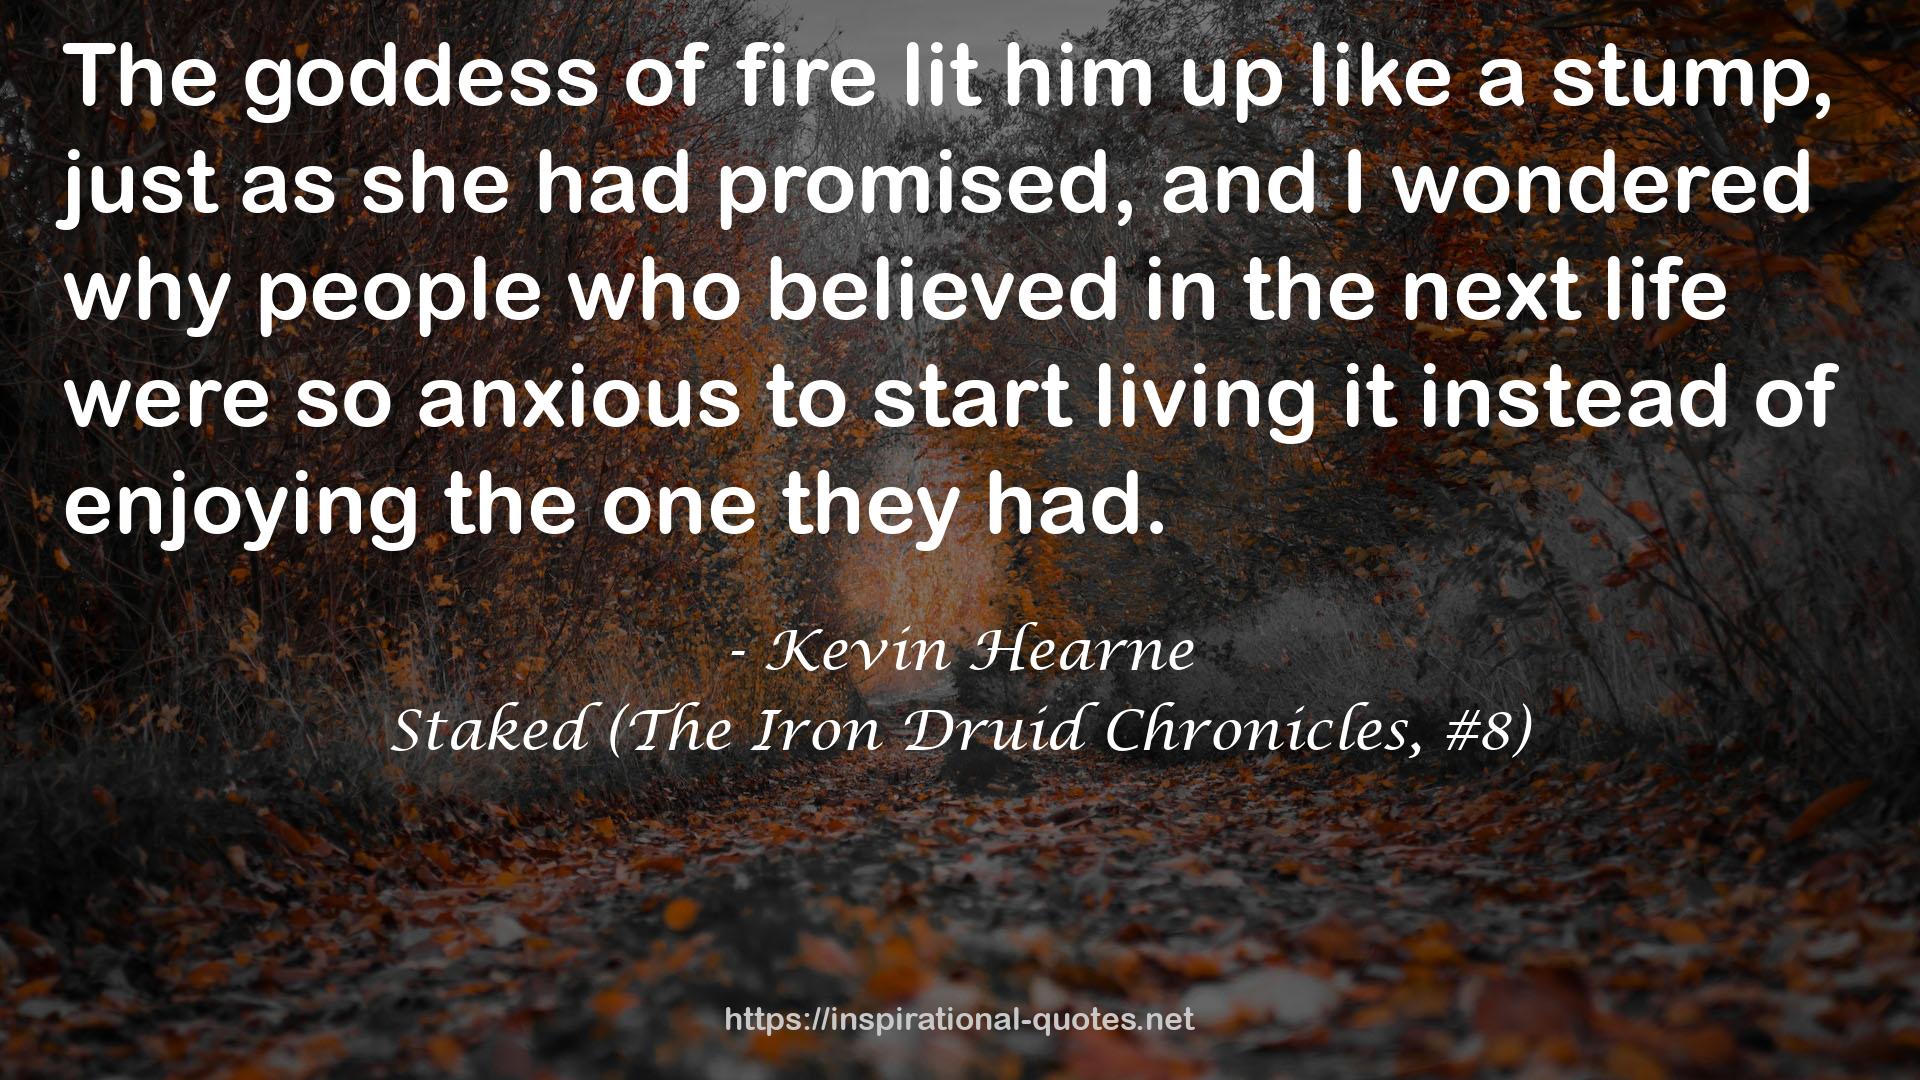 Staked (The Iron Druid Chronicles, #8) QUOTES